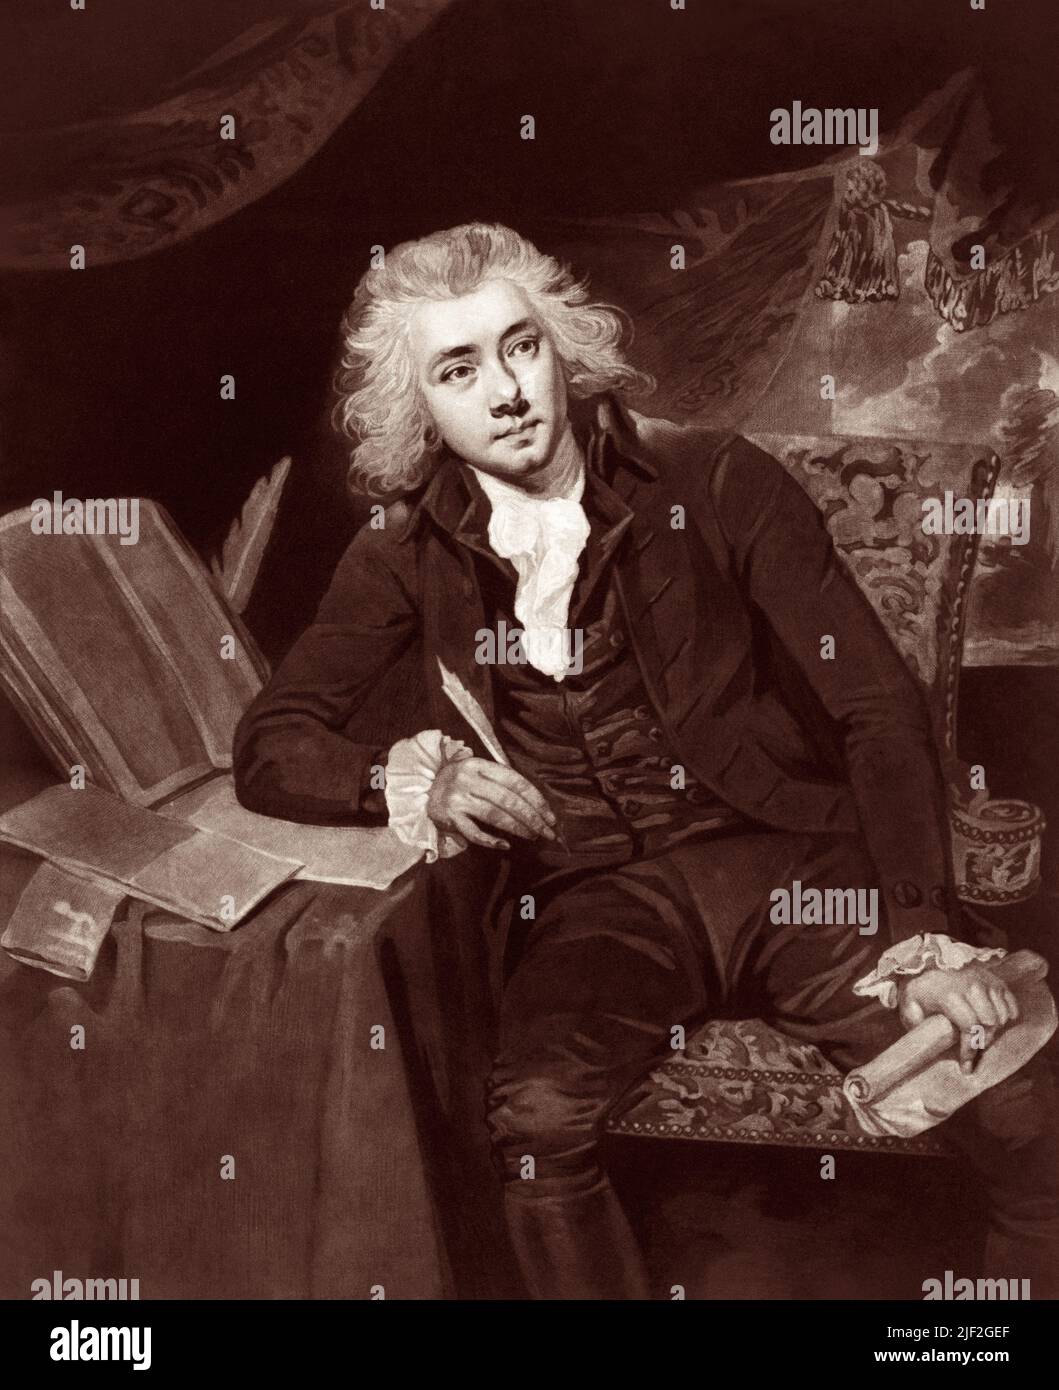 William Wilberforce (1759-1833) was an English politician, philanthropist, Evangelical Christian, and most famously a key leader in the abolition of the slave trade in the British empire. Stock Photo